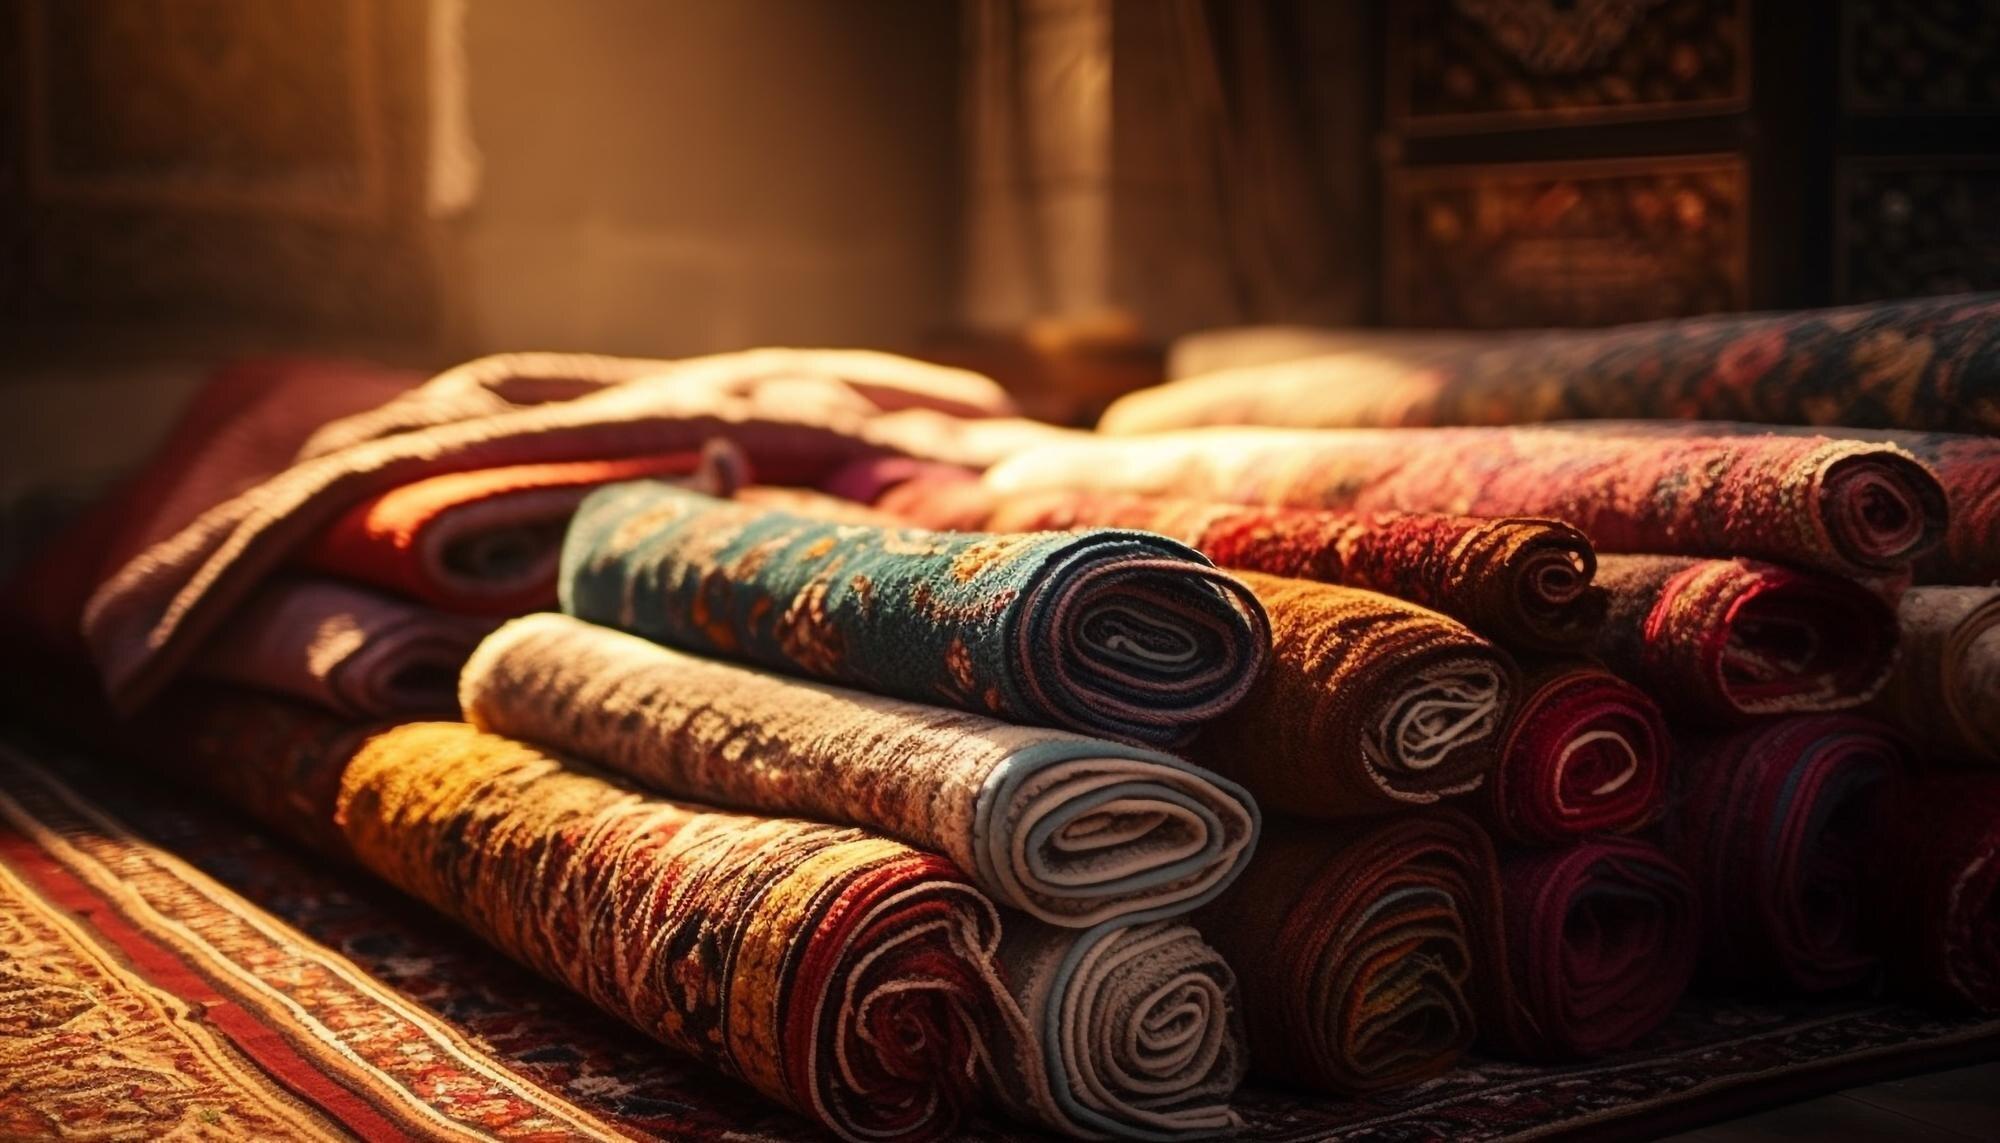 softness-elegance-old-fashioned-textiles-pile-high-generated-by-ai-188544-20510-2.jpg